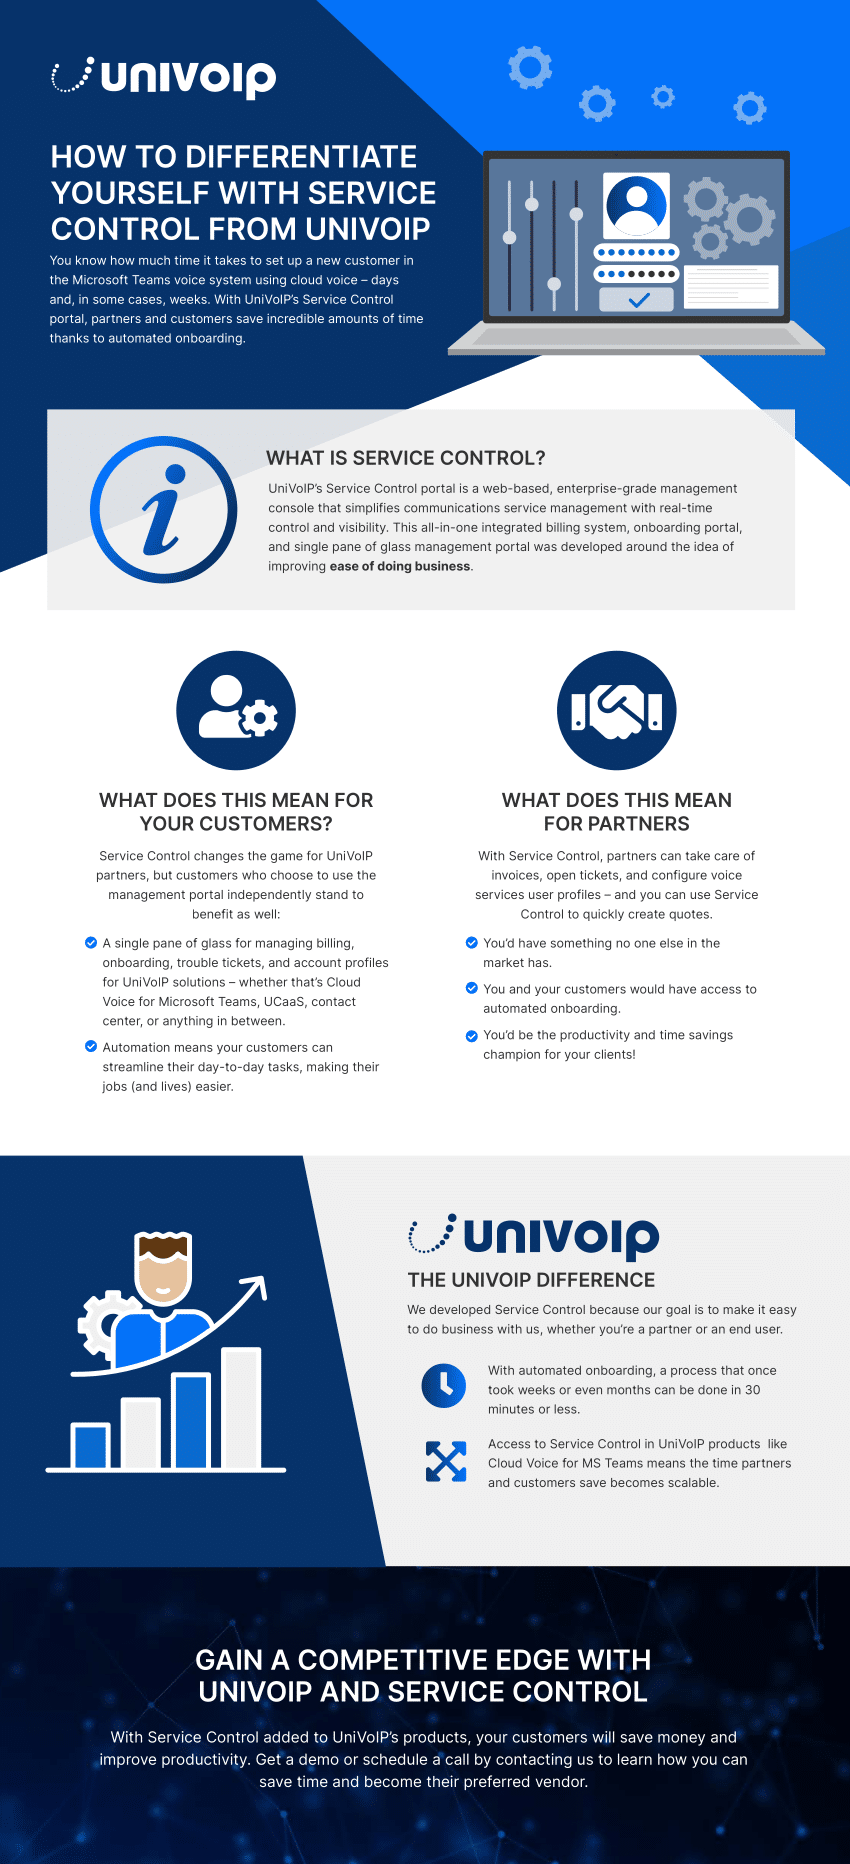 How serivce control from univoip works